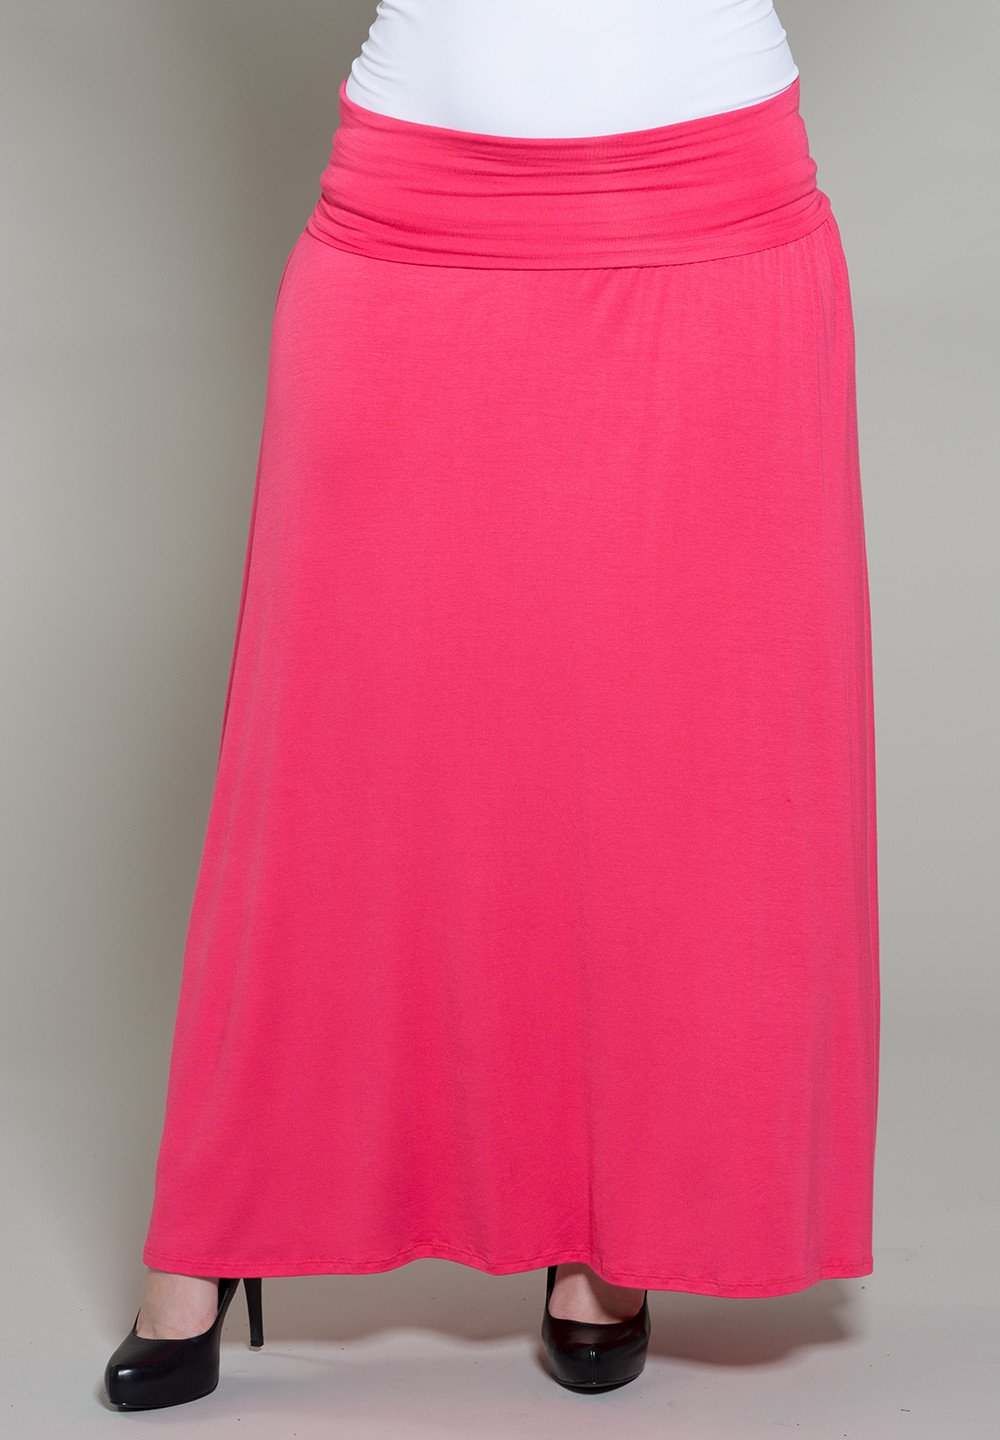 California Boho-Chic Maxi Skirt in Pink - Plus Size